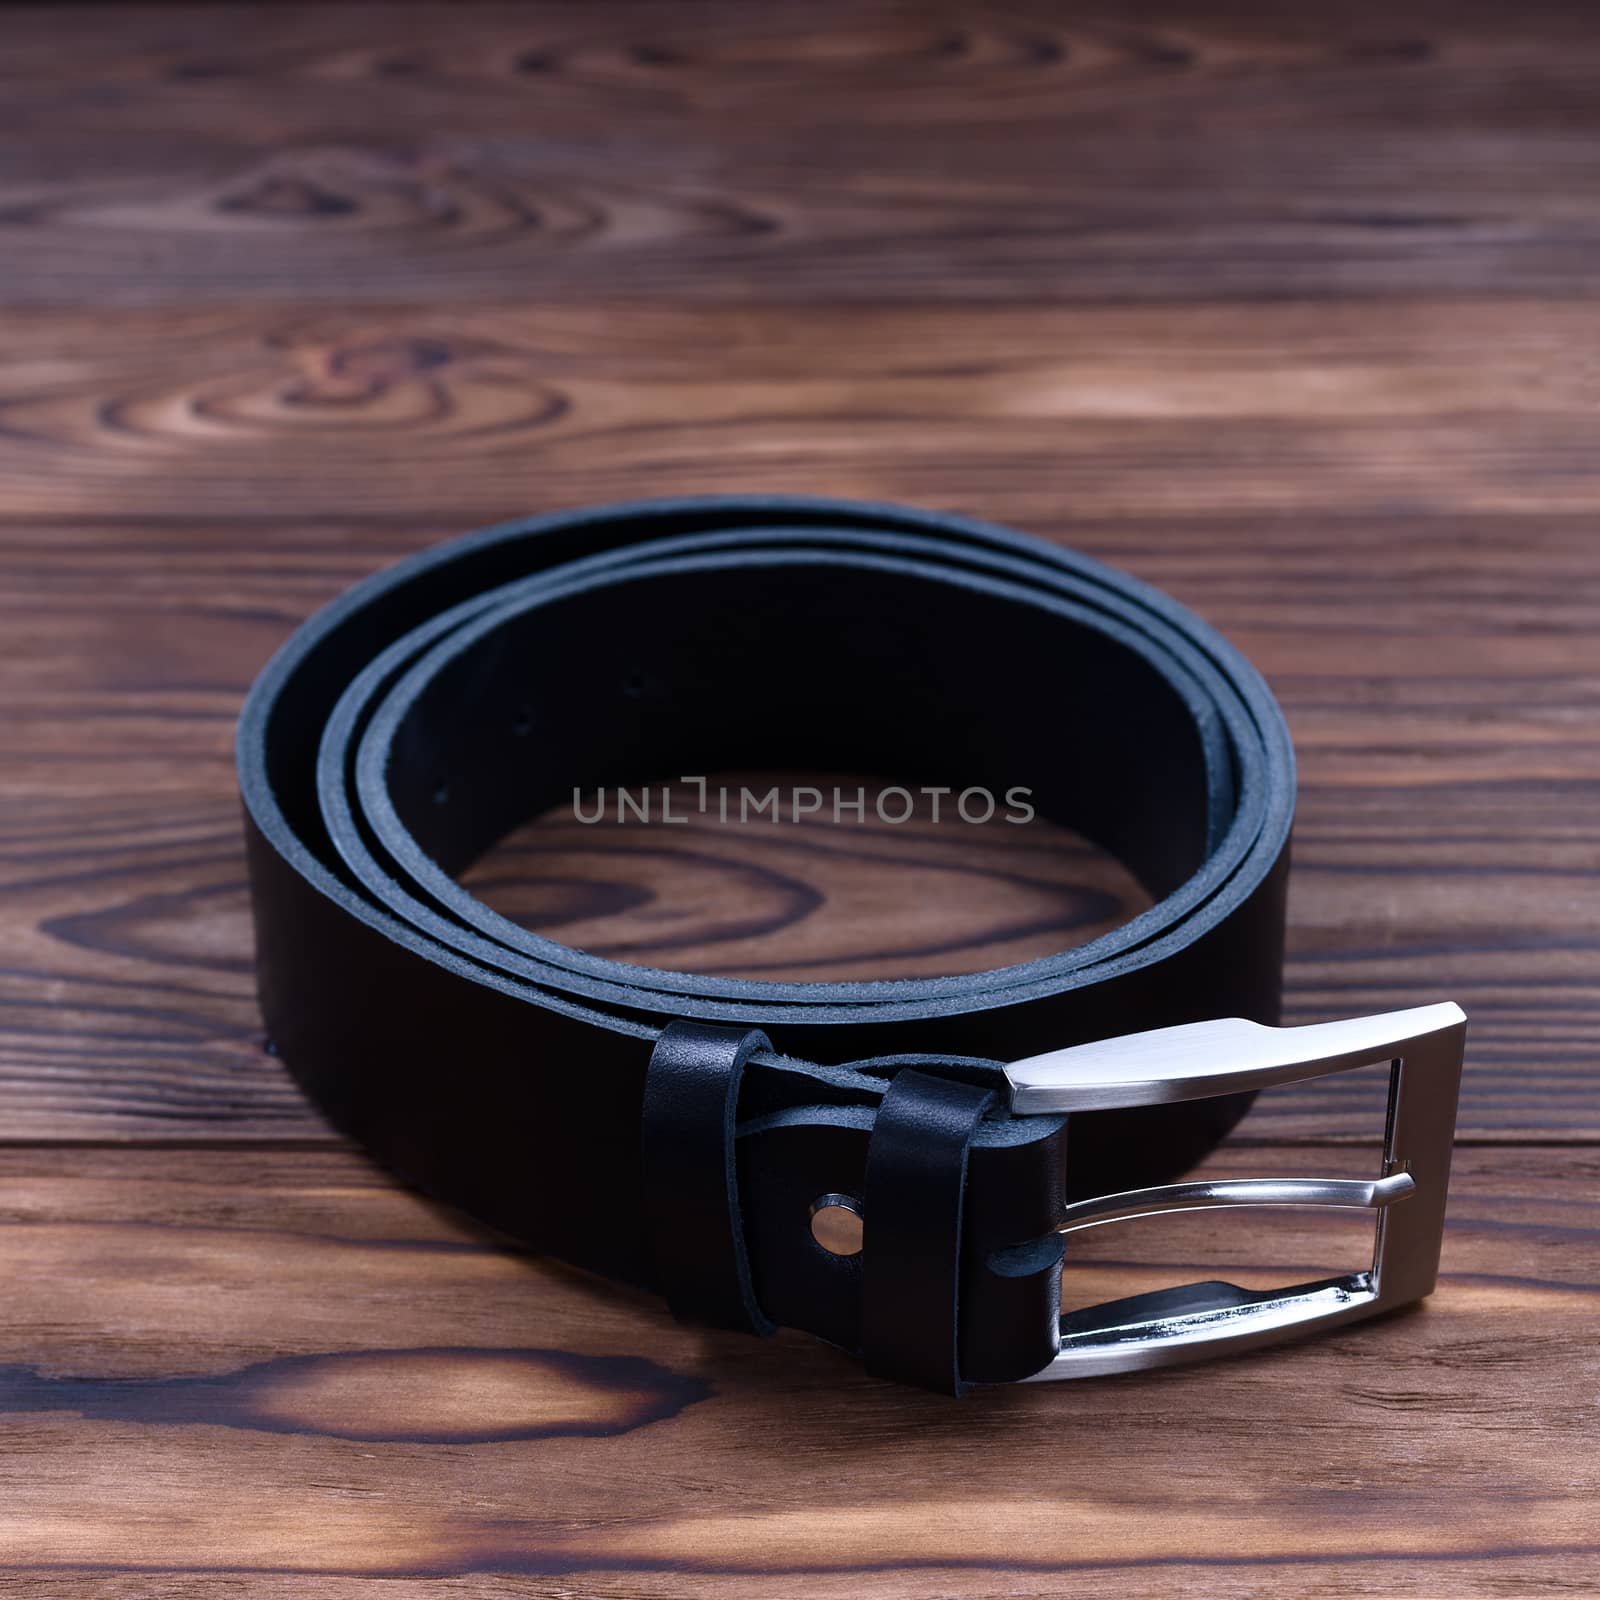 Black color handmade belt lies on textured wooden background. The belt is twisted into a ring. Closeup side view. Stock photo of businessman accessories. by alexsdriver